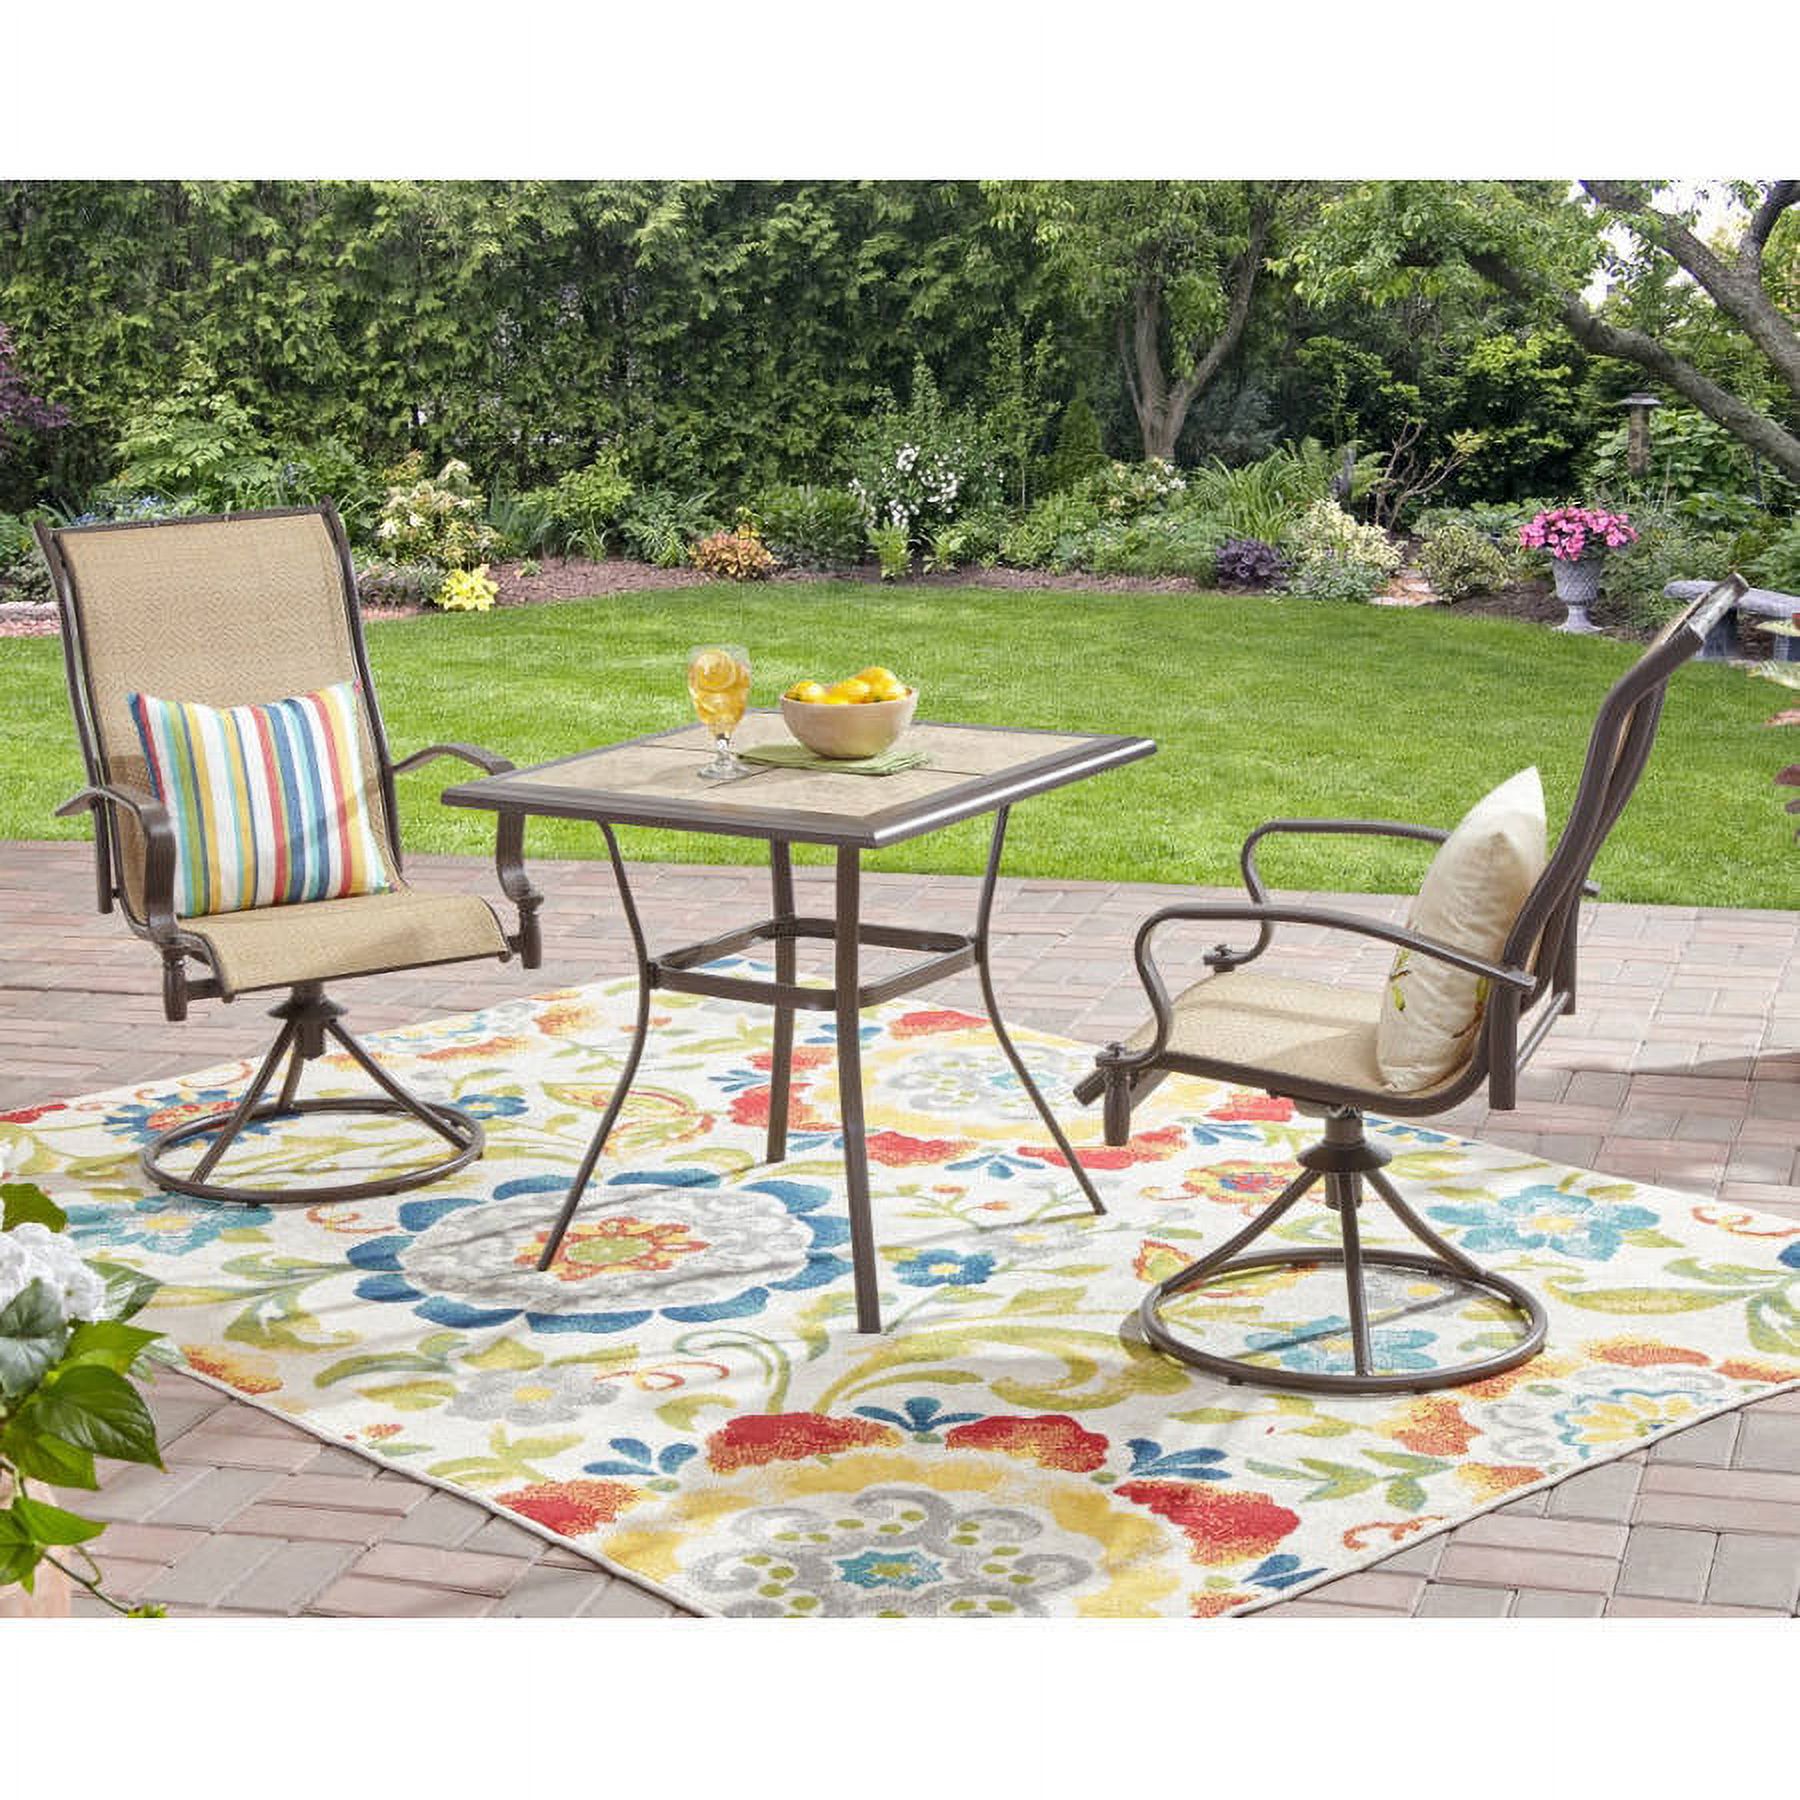 Mainstays Wesley Creek 3-Piece Outdoor Bistro Set with Swivel Chairs - image 1 of 2